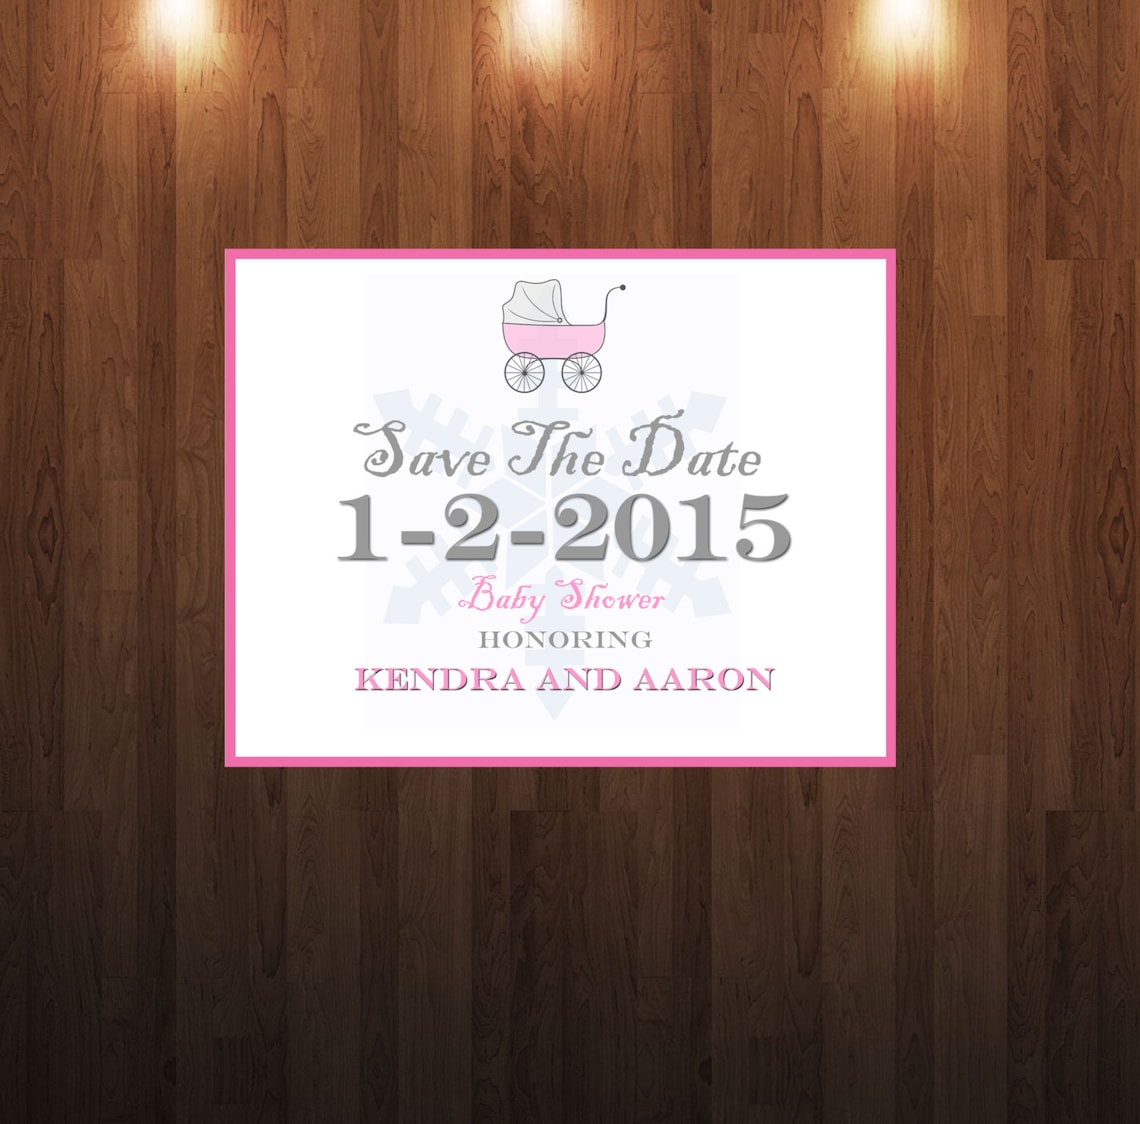 Save the Date Baby Shower Invitation 5.5x4.25 Digital File - Etsy 日本